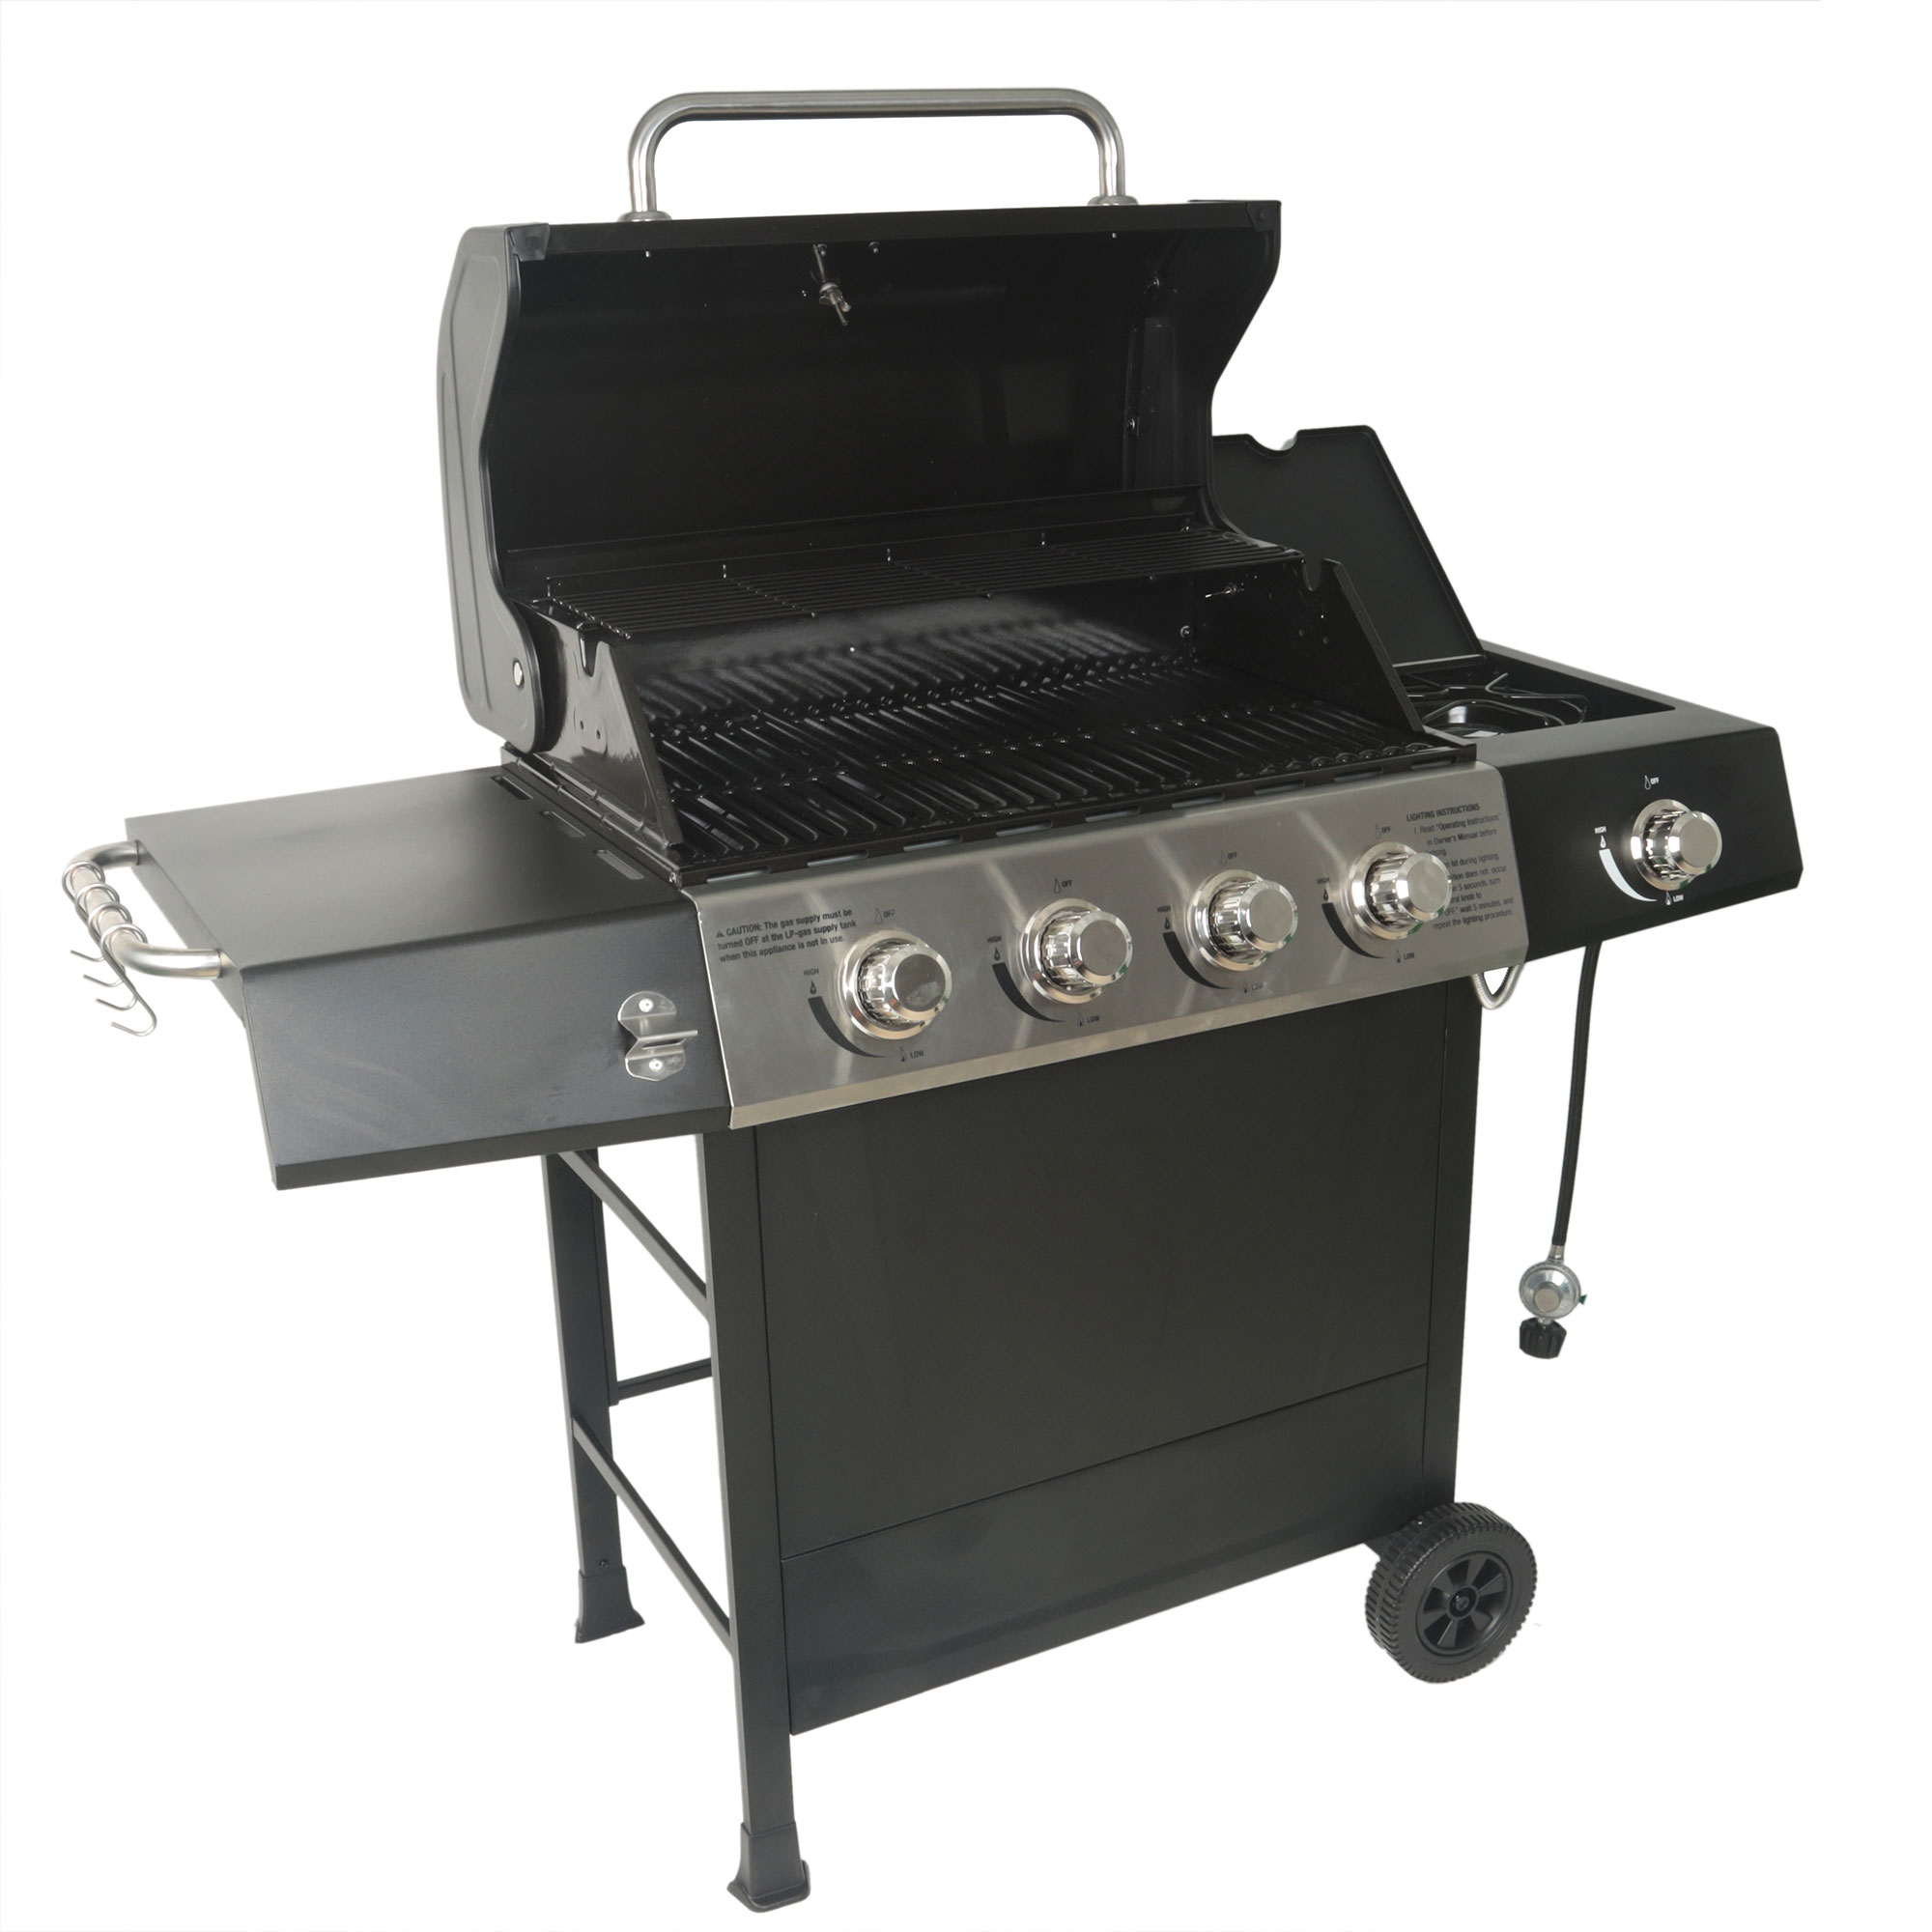 Grill Boss 4-Burner Gas Grill w/ Side Burner, Cover, and Side Shelves - image 1 of 12